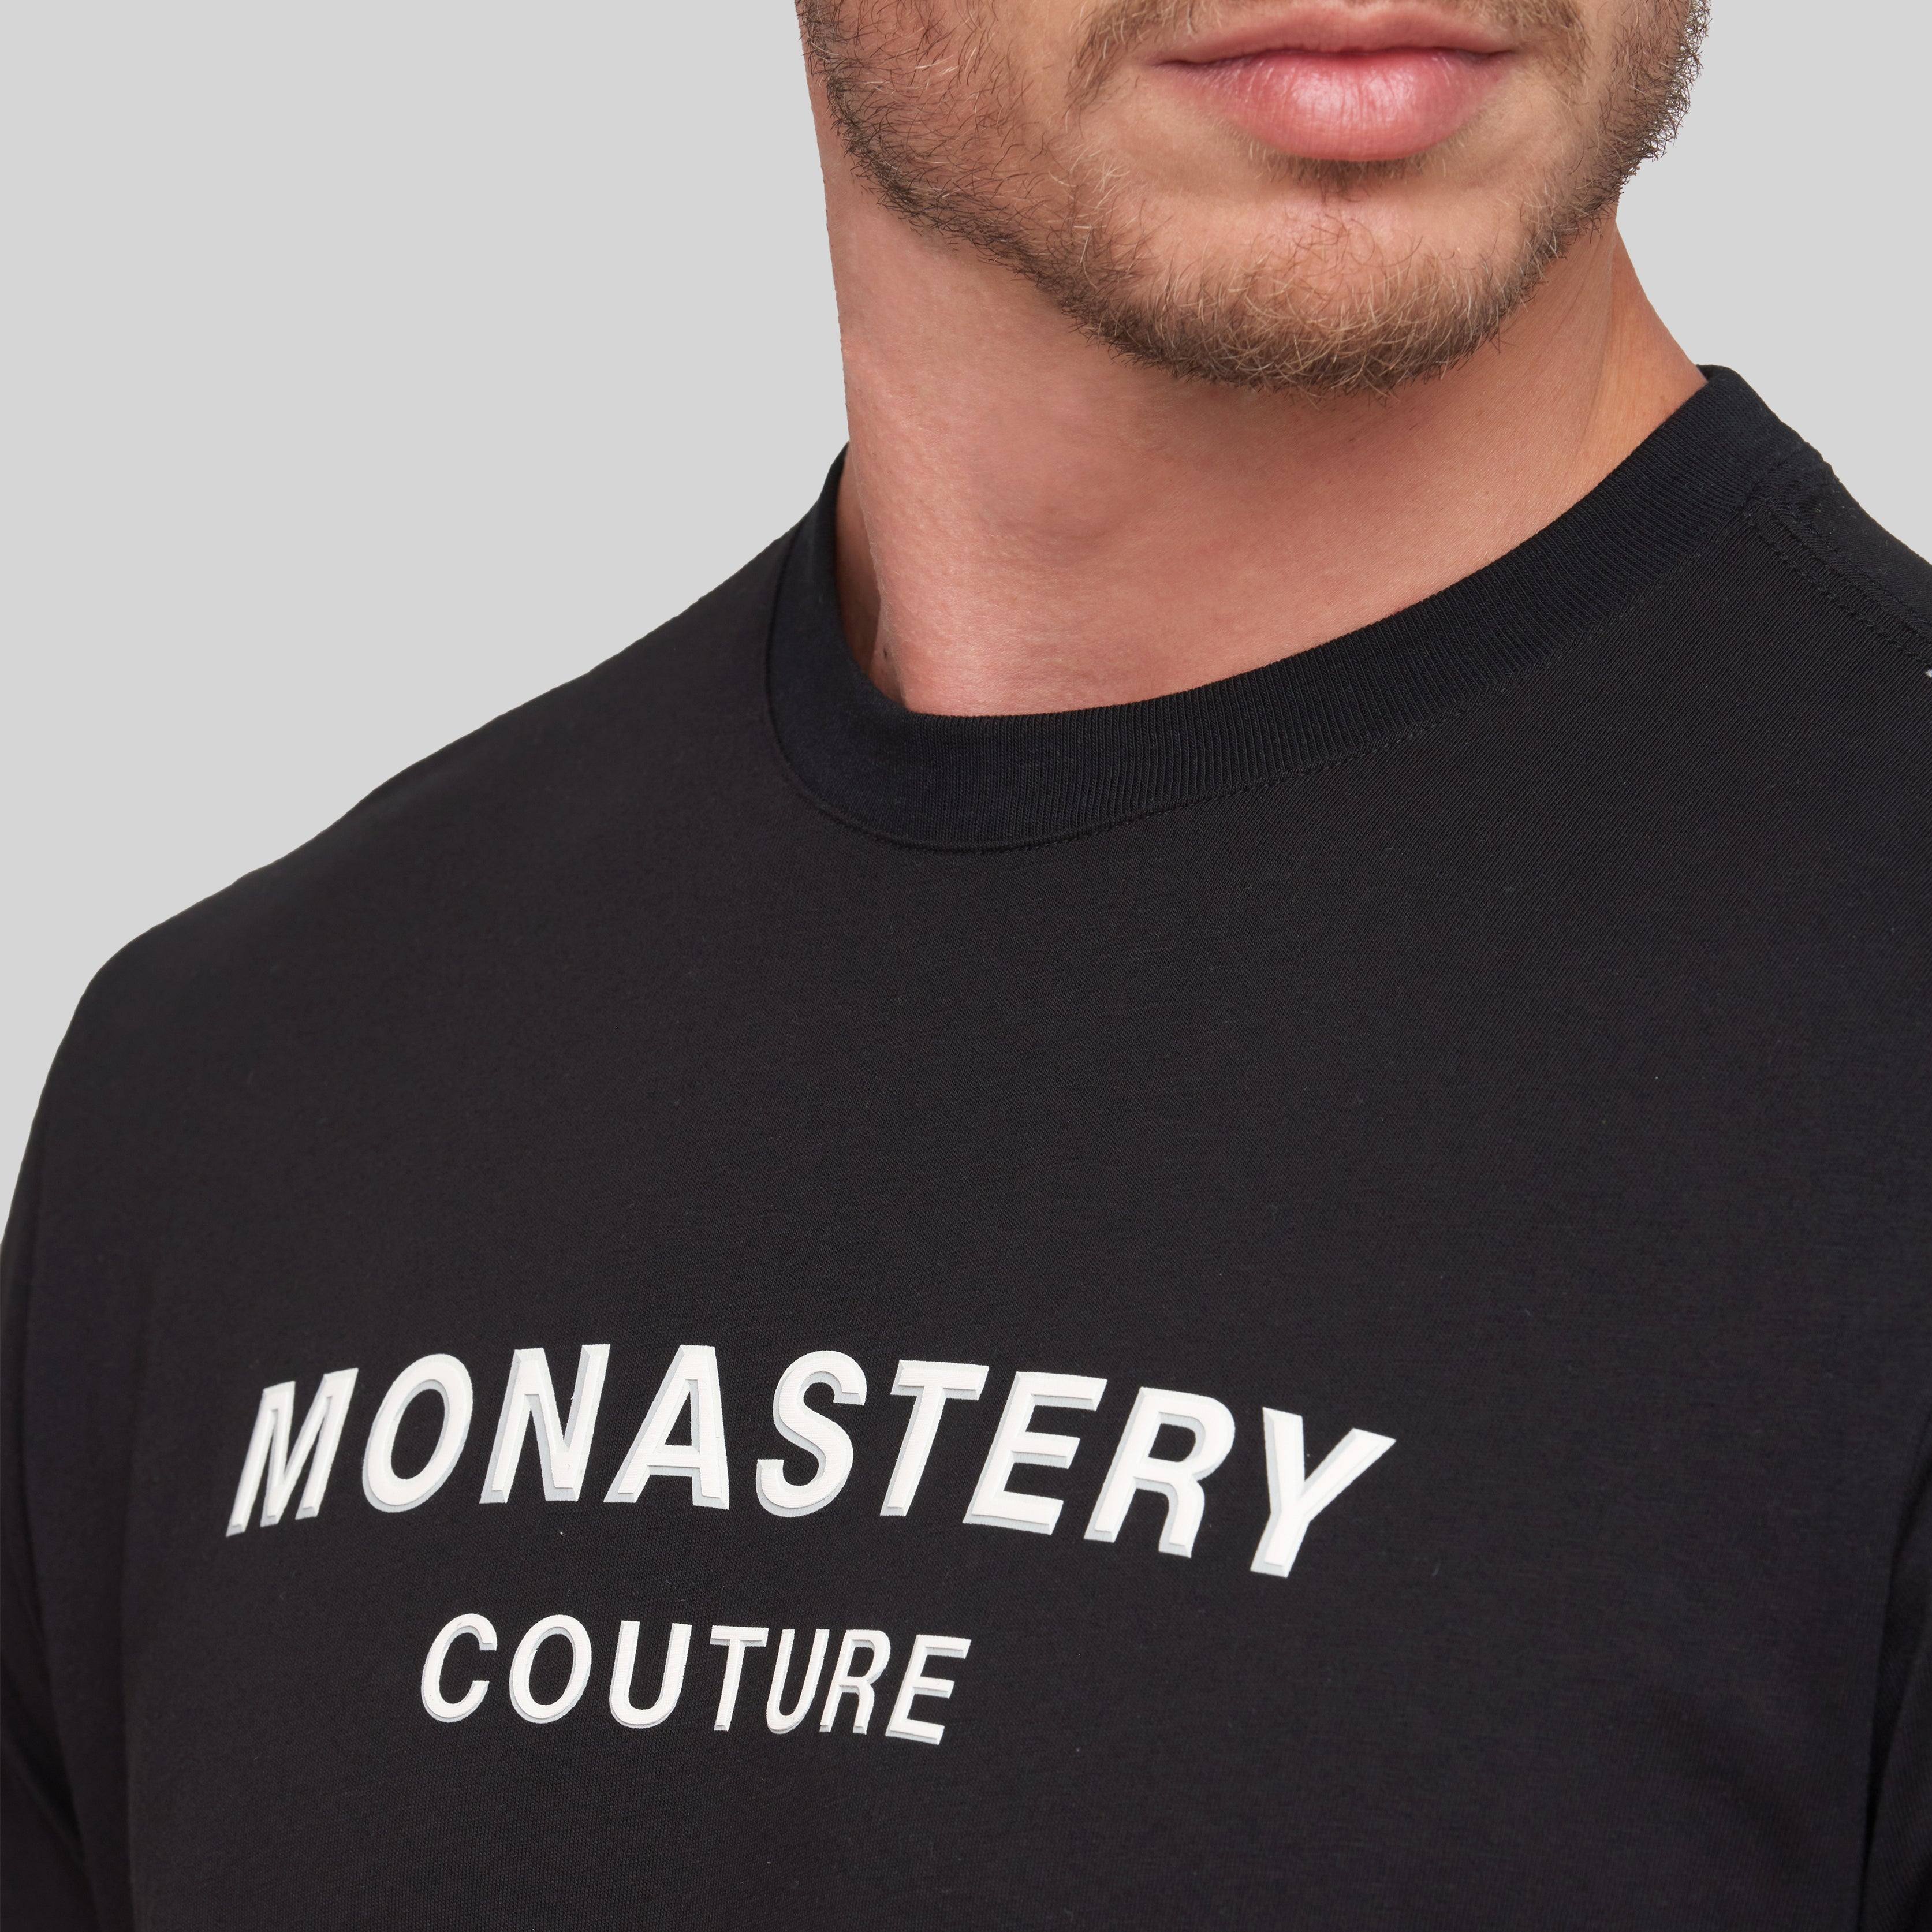 SULTES BLACK T-SHIRT | Monastery Couture